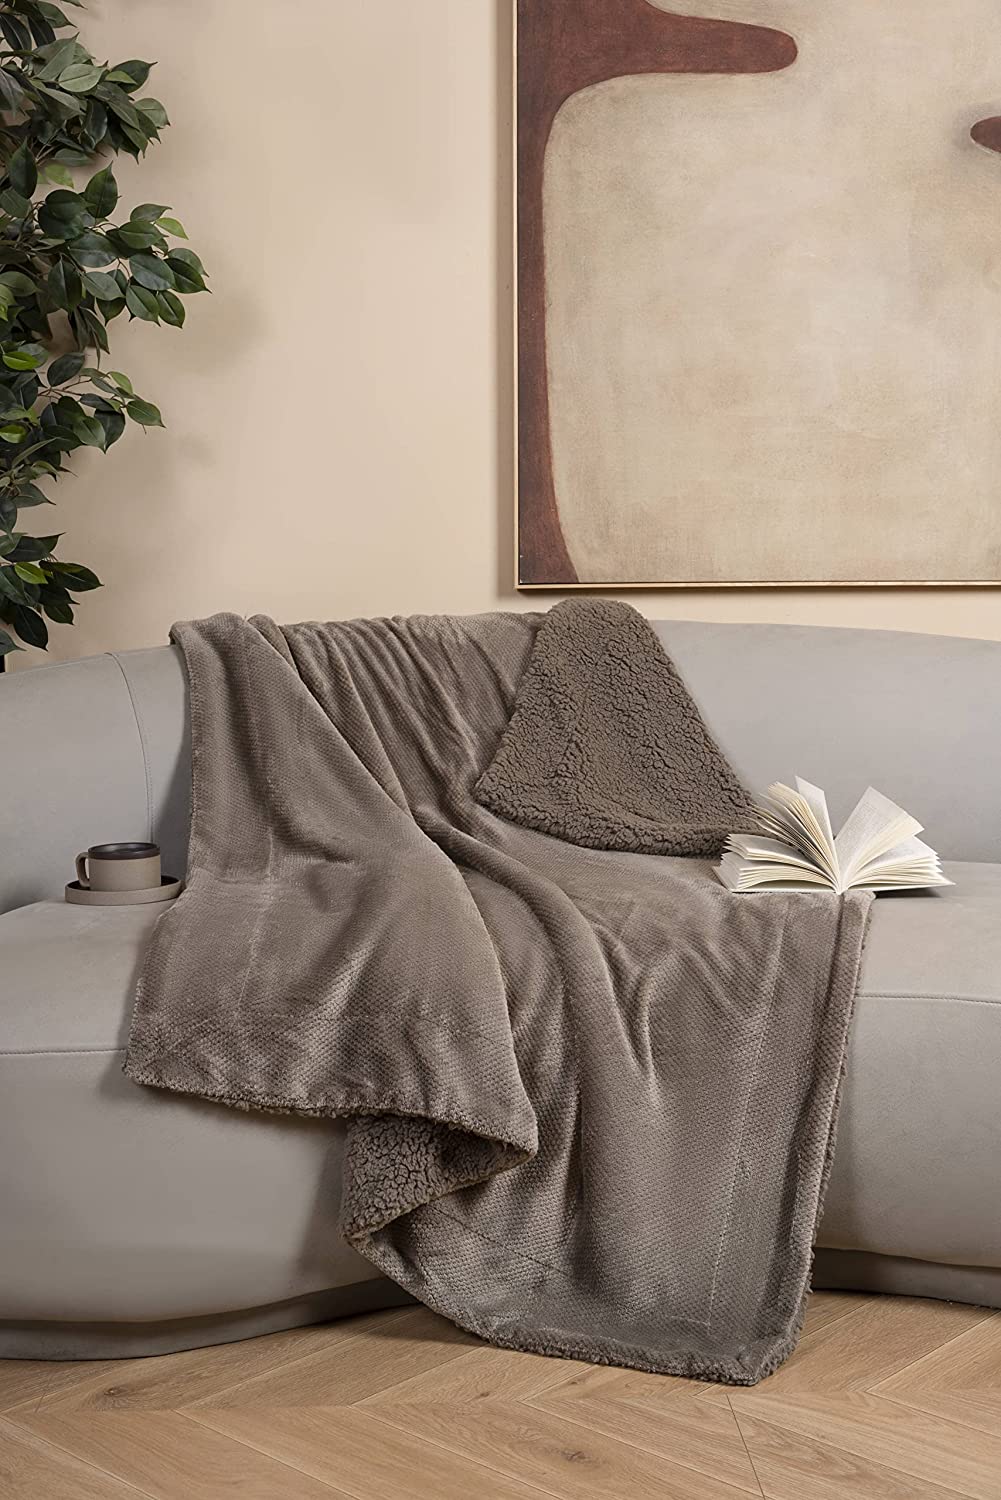 KOHONE Sherpa Soft Throw & Blanket for Couch 60 inch X 50 inch, Thick Warm Fuzzy Cozy Throws Blankets for Bed, Sofa and Travel, Reversible Plush Fleece Blankets